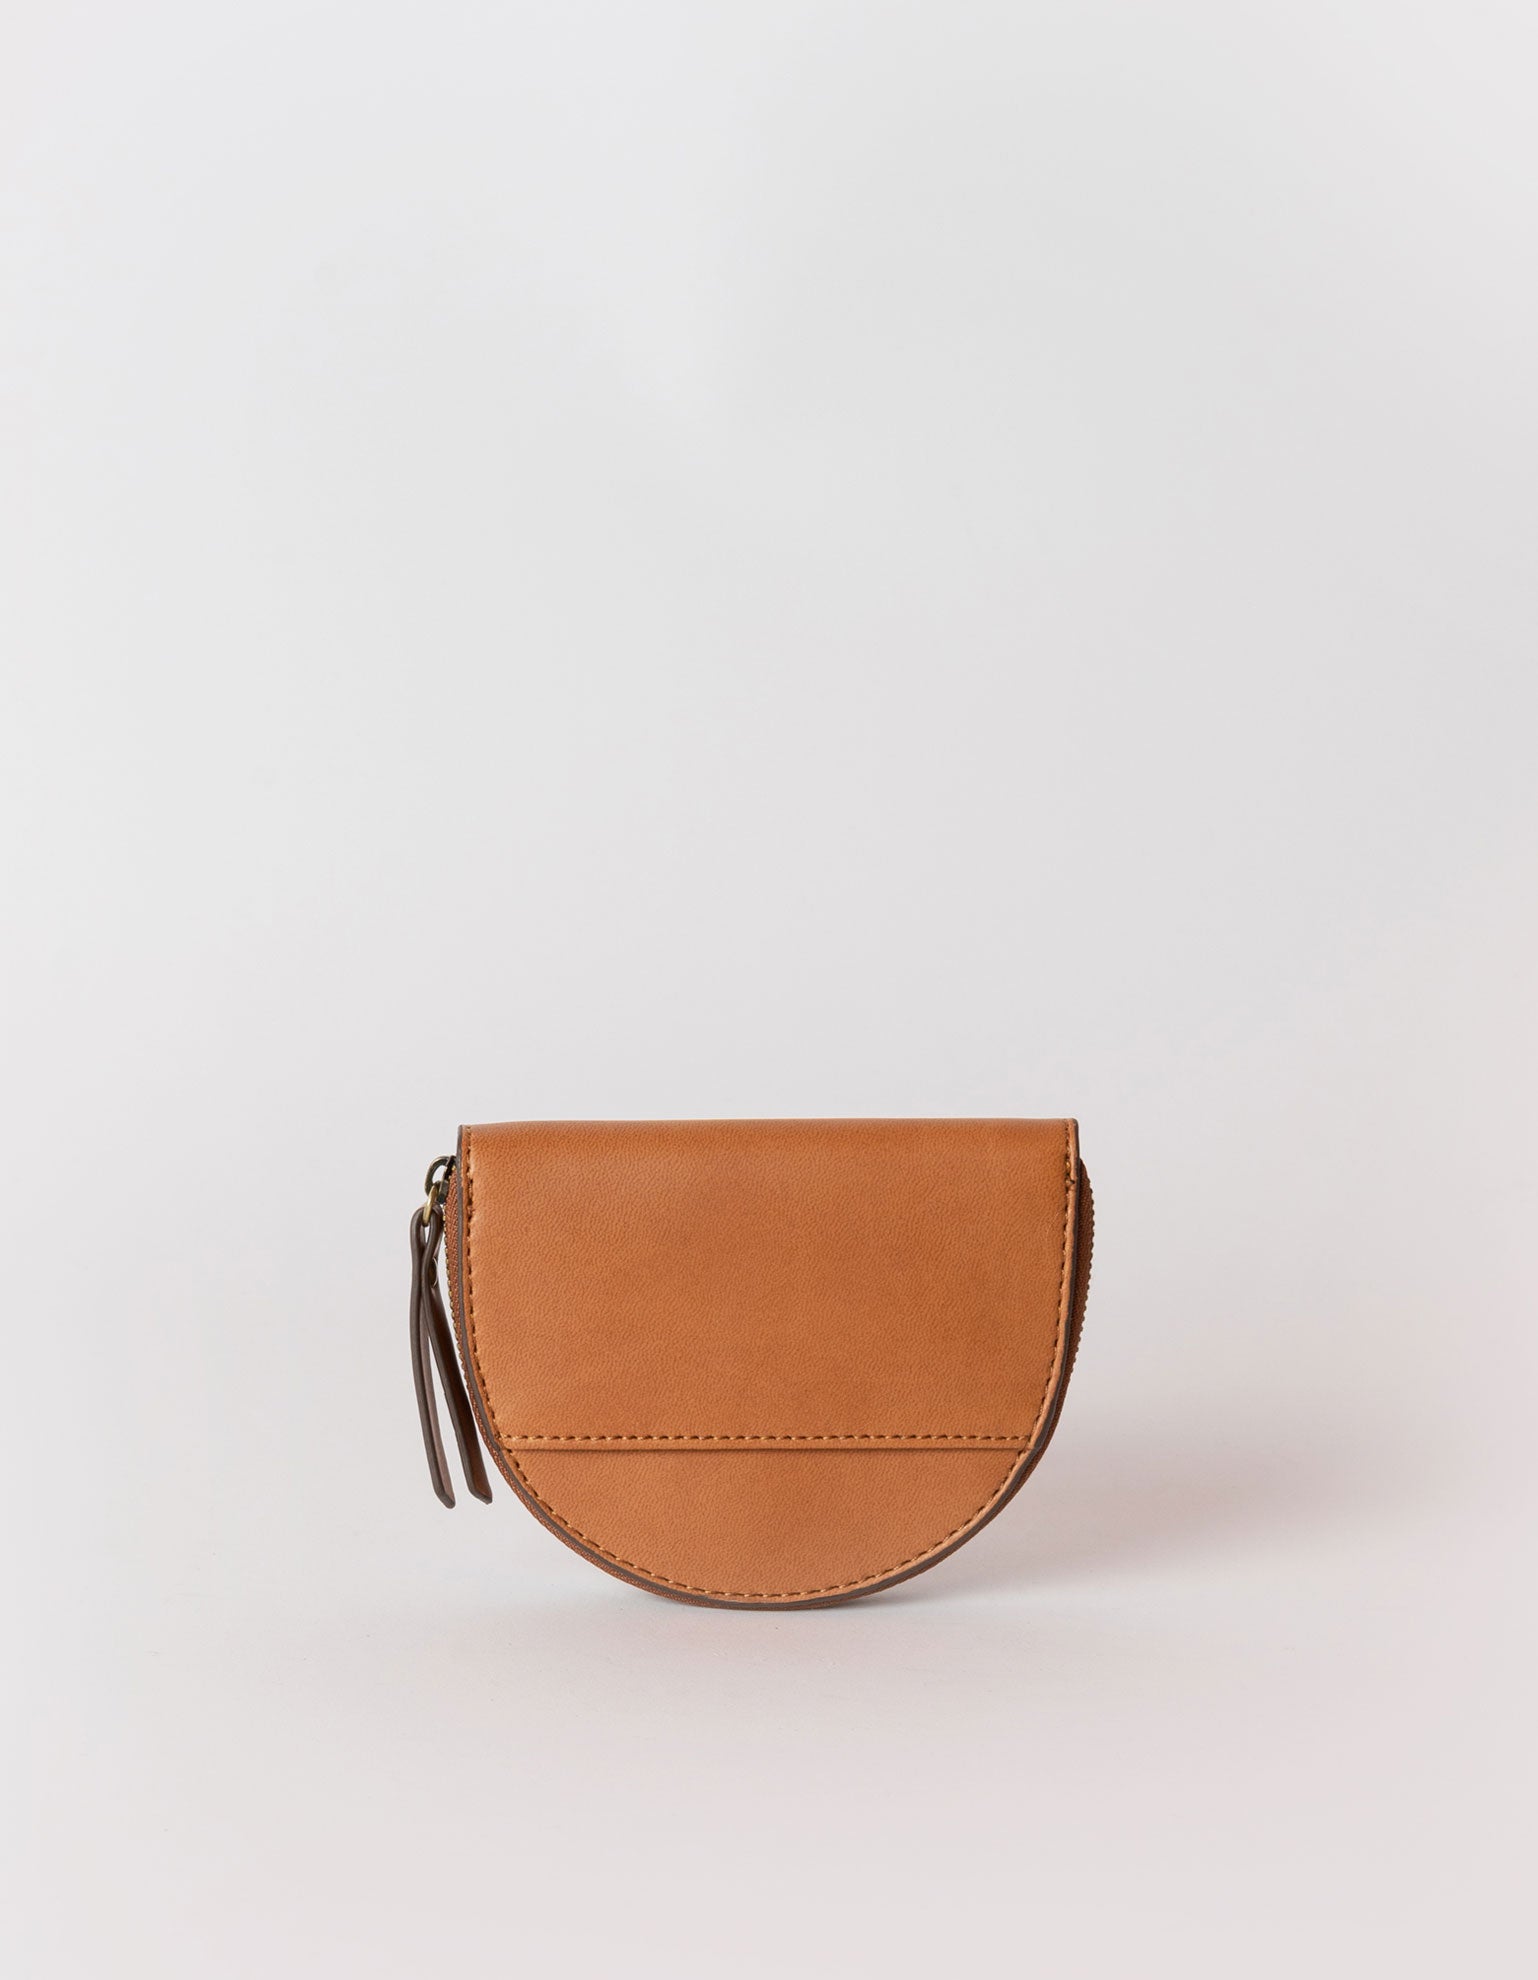 Laura coin purse cognac apple leather. Back product image.